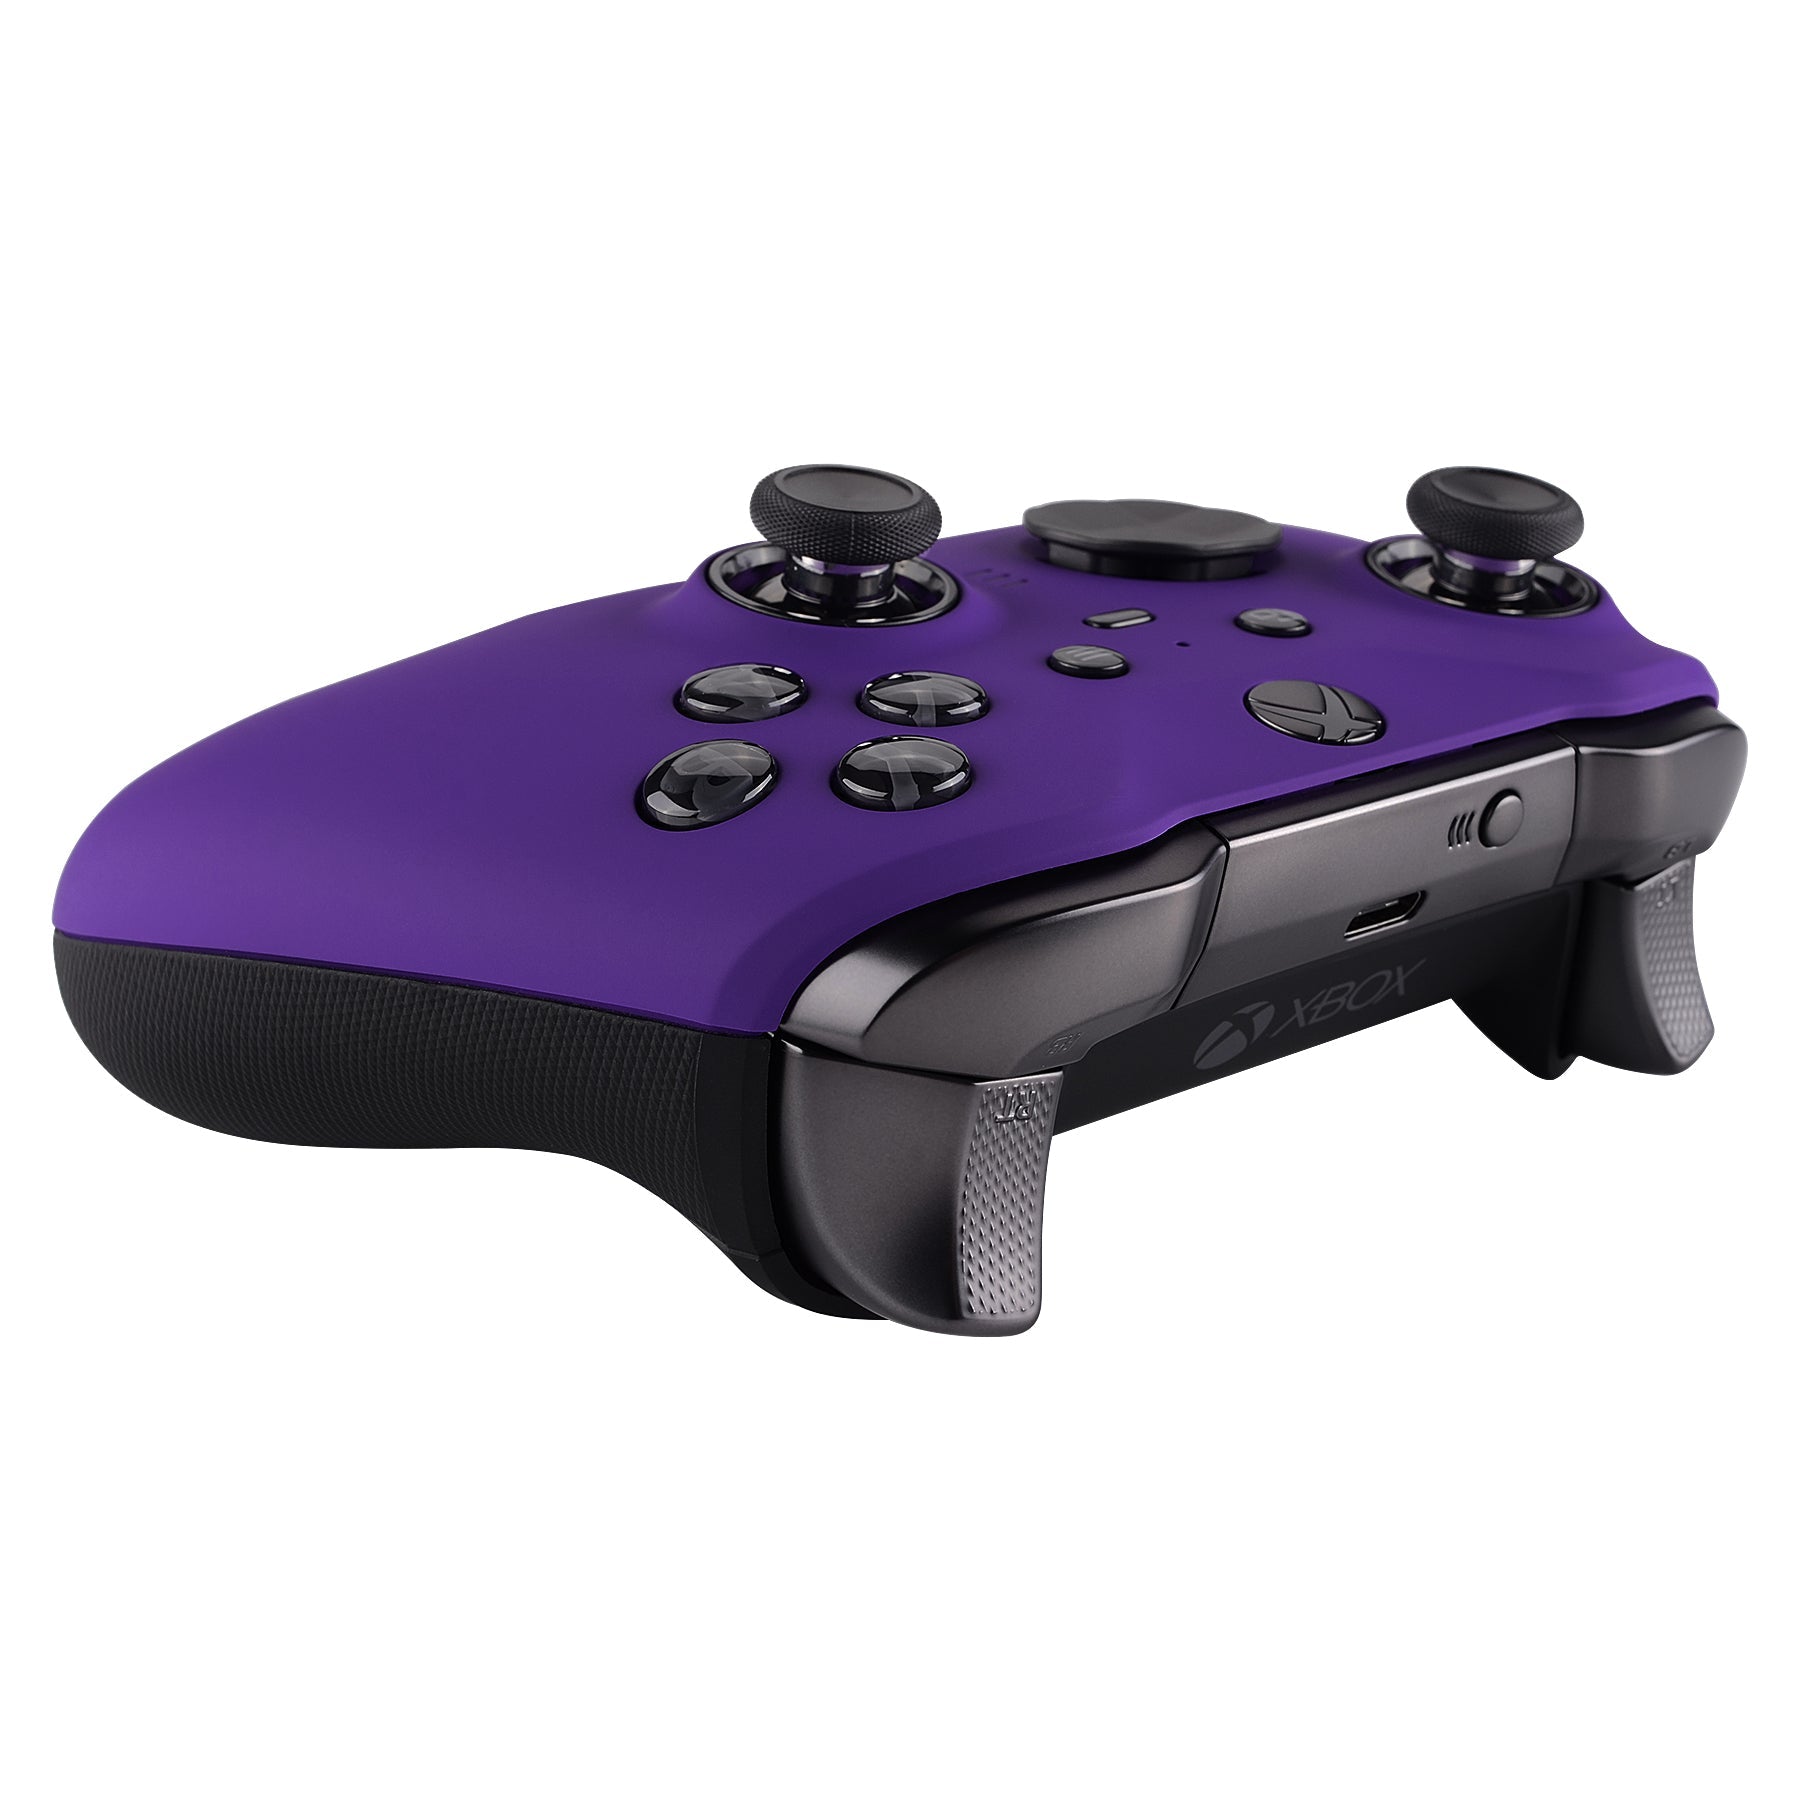 eXtremeRate Retail Purple Soft Touch Grip Faceplate Cover, Front Housing Shell Case Replacement Kit for Xbox One Elite Series 2 Controller (Model 1797 and Core Model 1797) - Thumbstick Accent Rings Included - ELP307